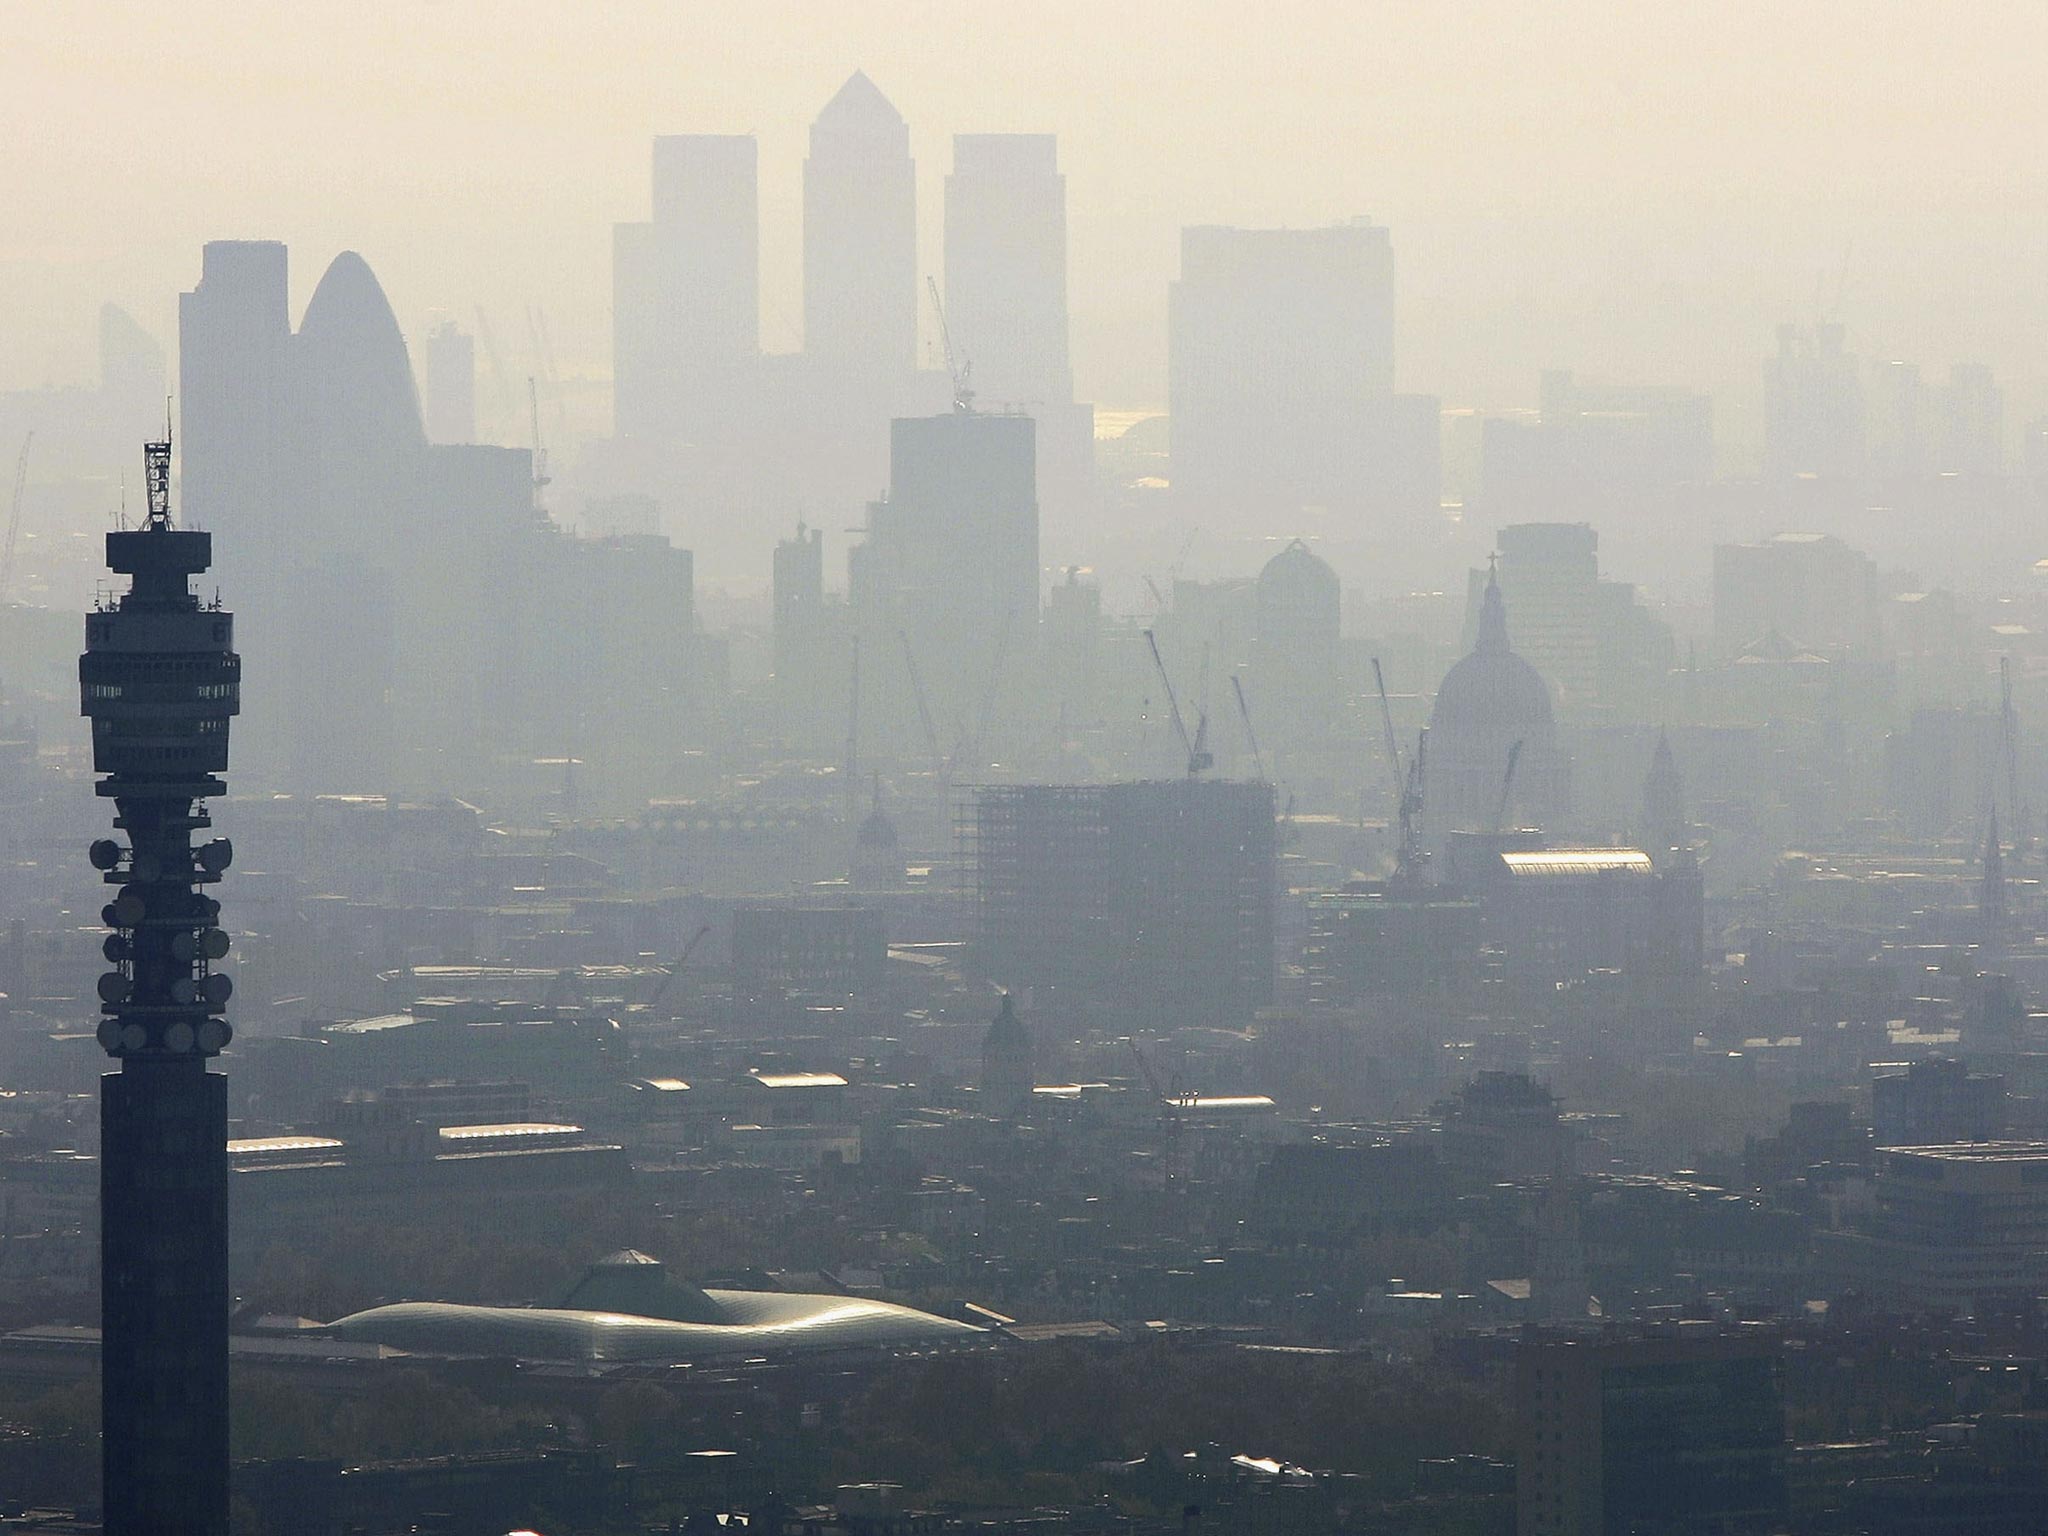 A polluted London skyline during morning rush hour